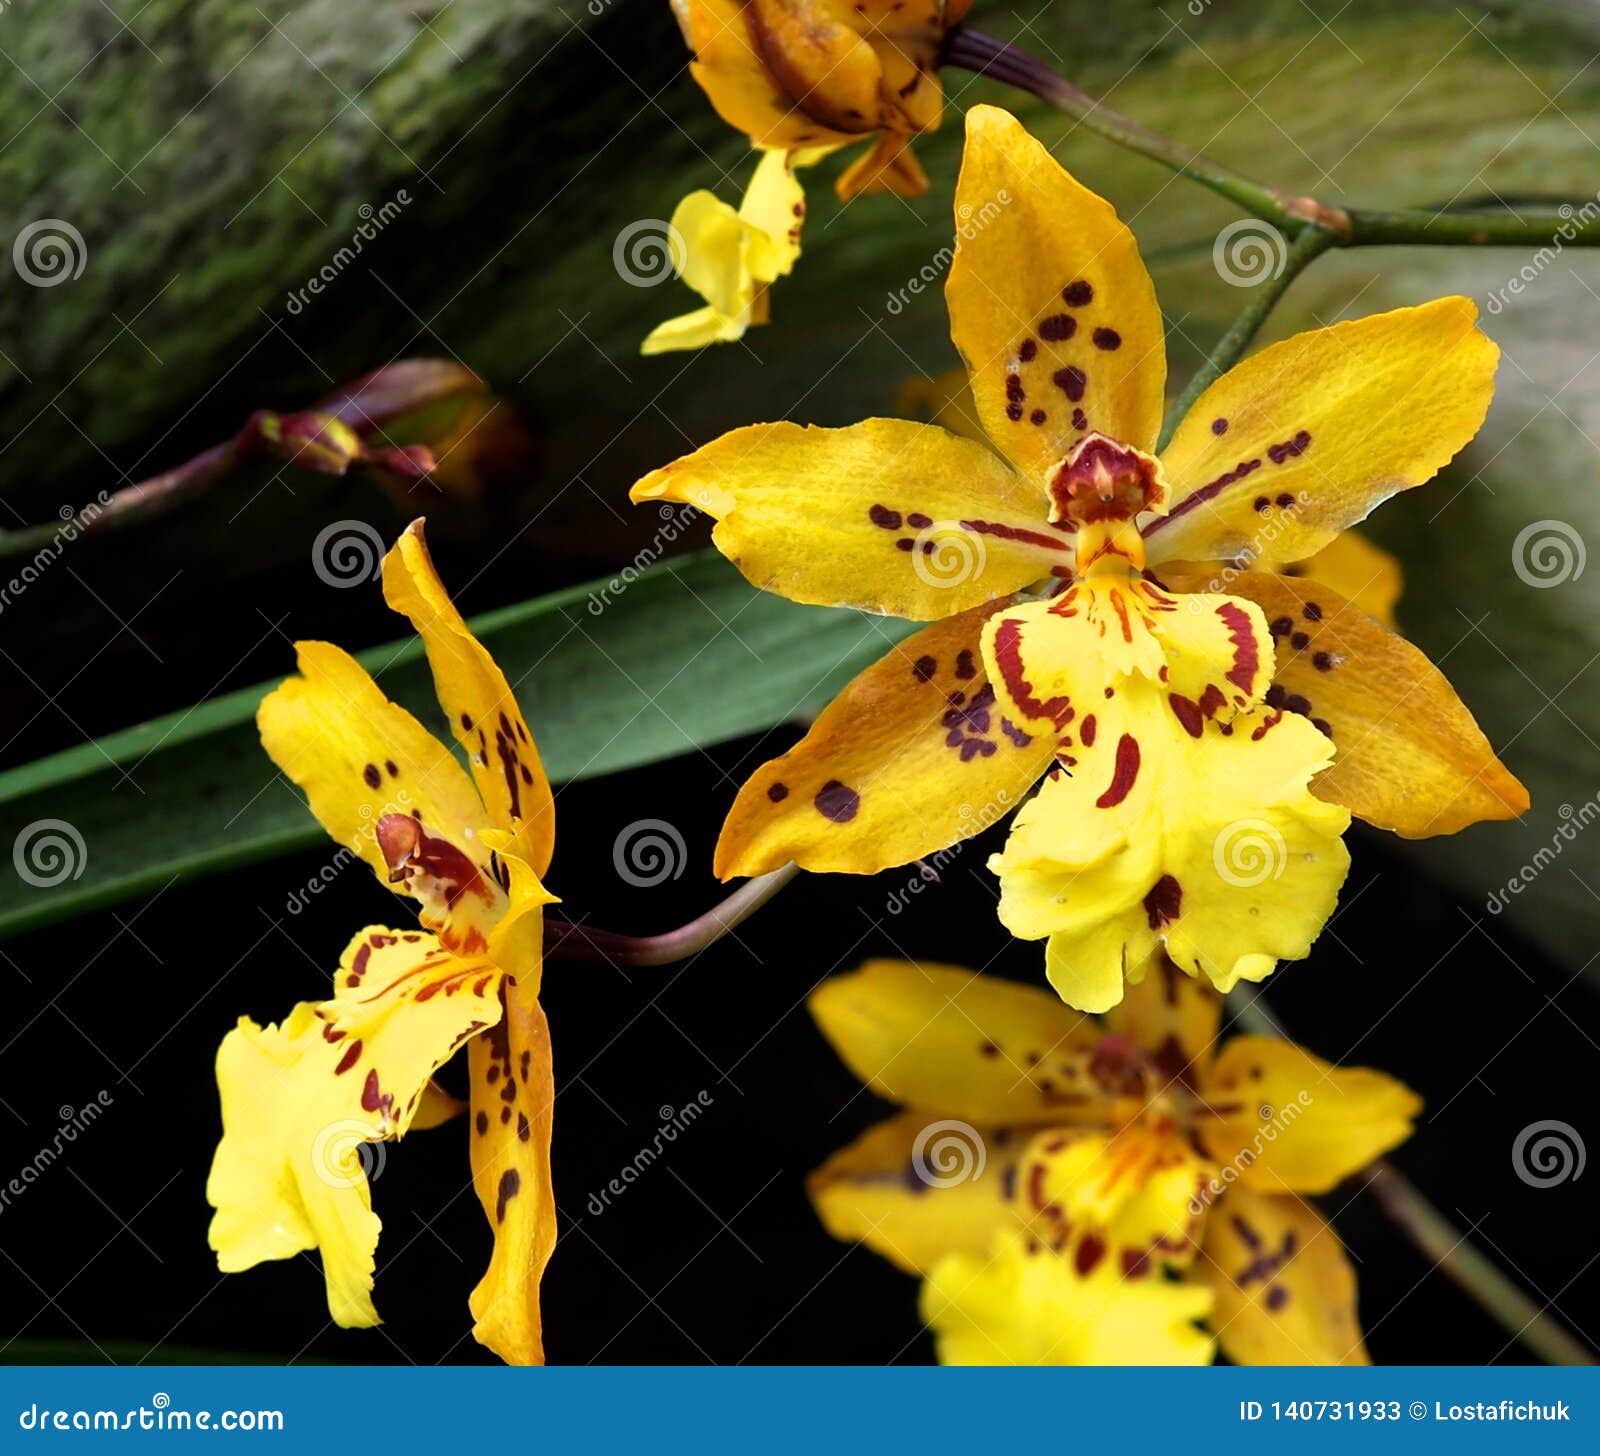 Brown and Yellow Oncidium Orchid Stock Image - Image of greenhouse, bloom:  140731933